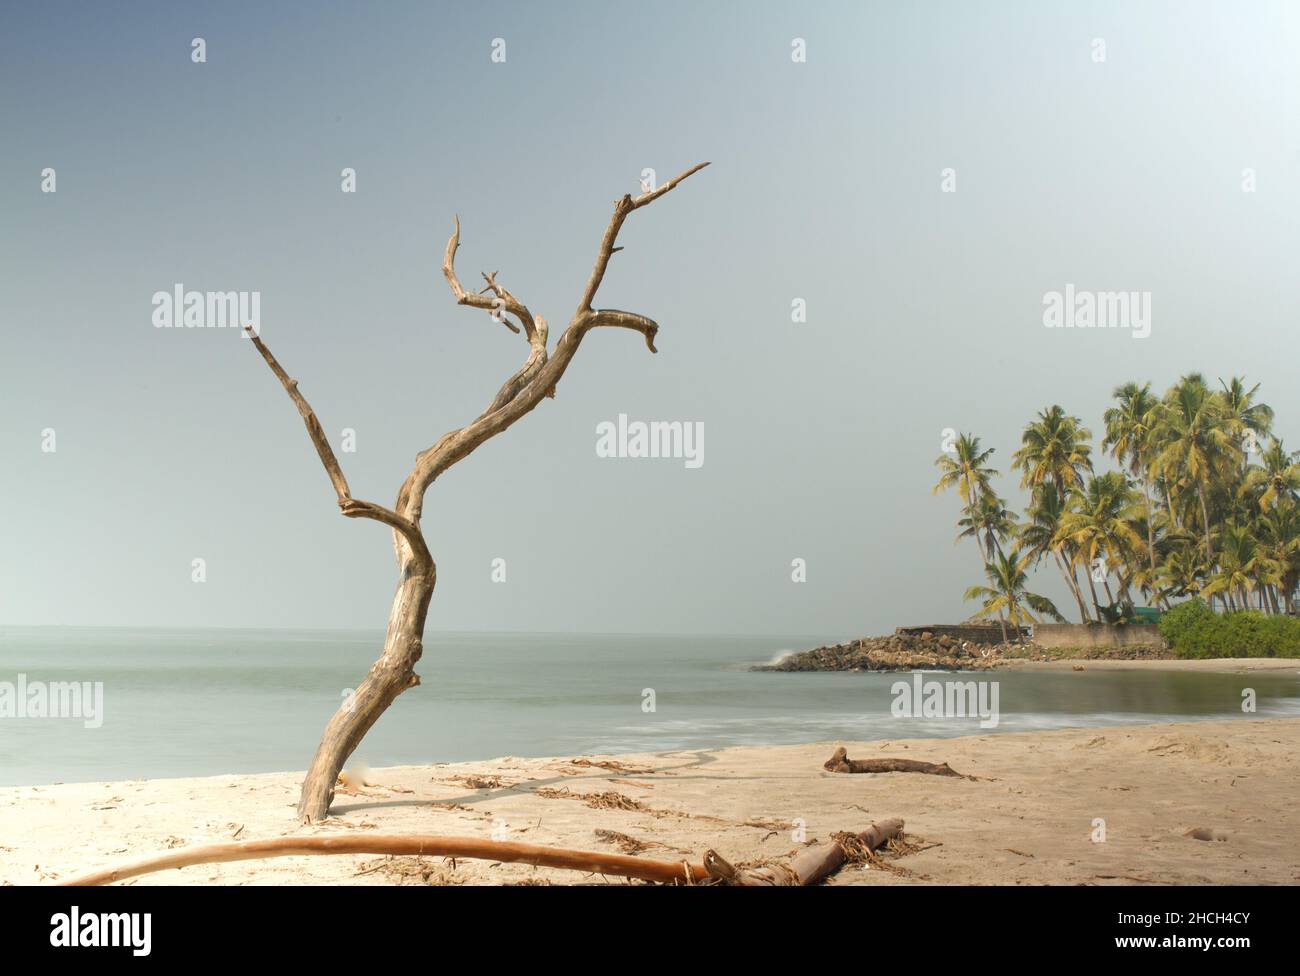 View of the beach in South India with a dead tree in the foreground Stock Photo